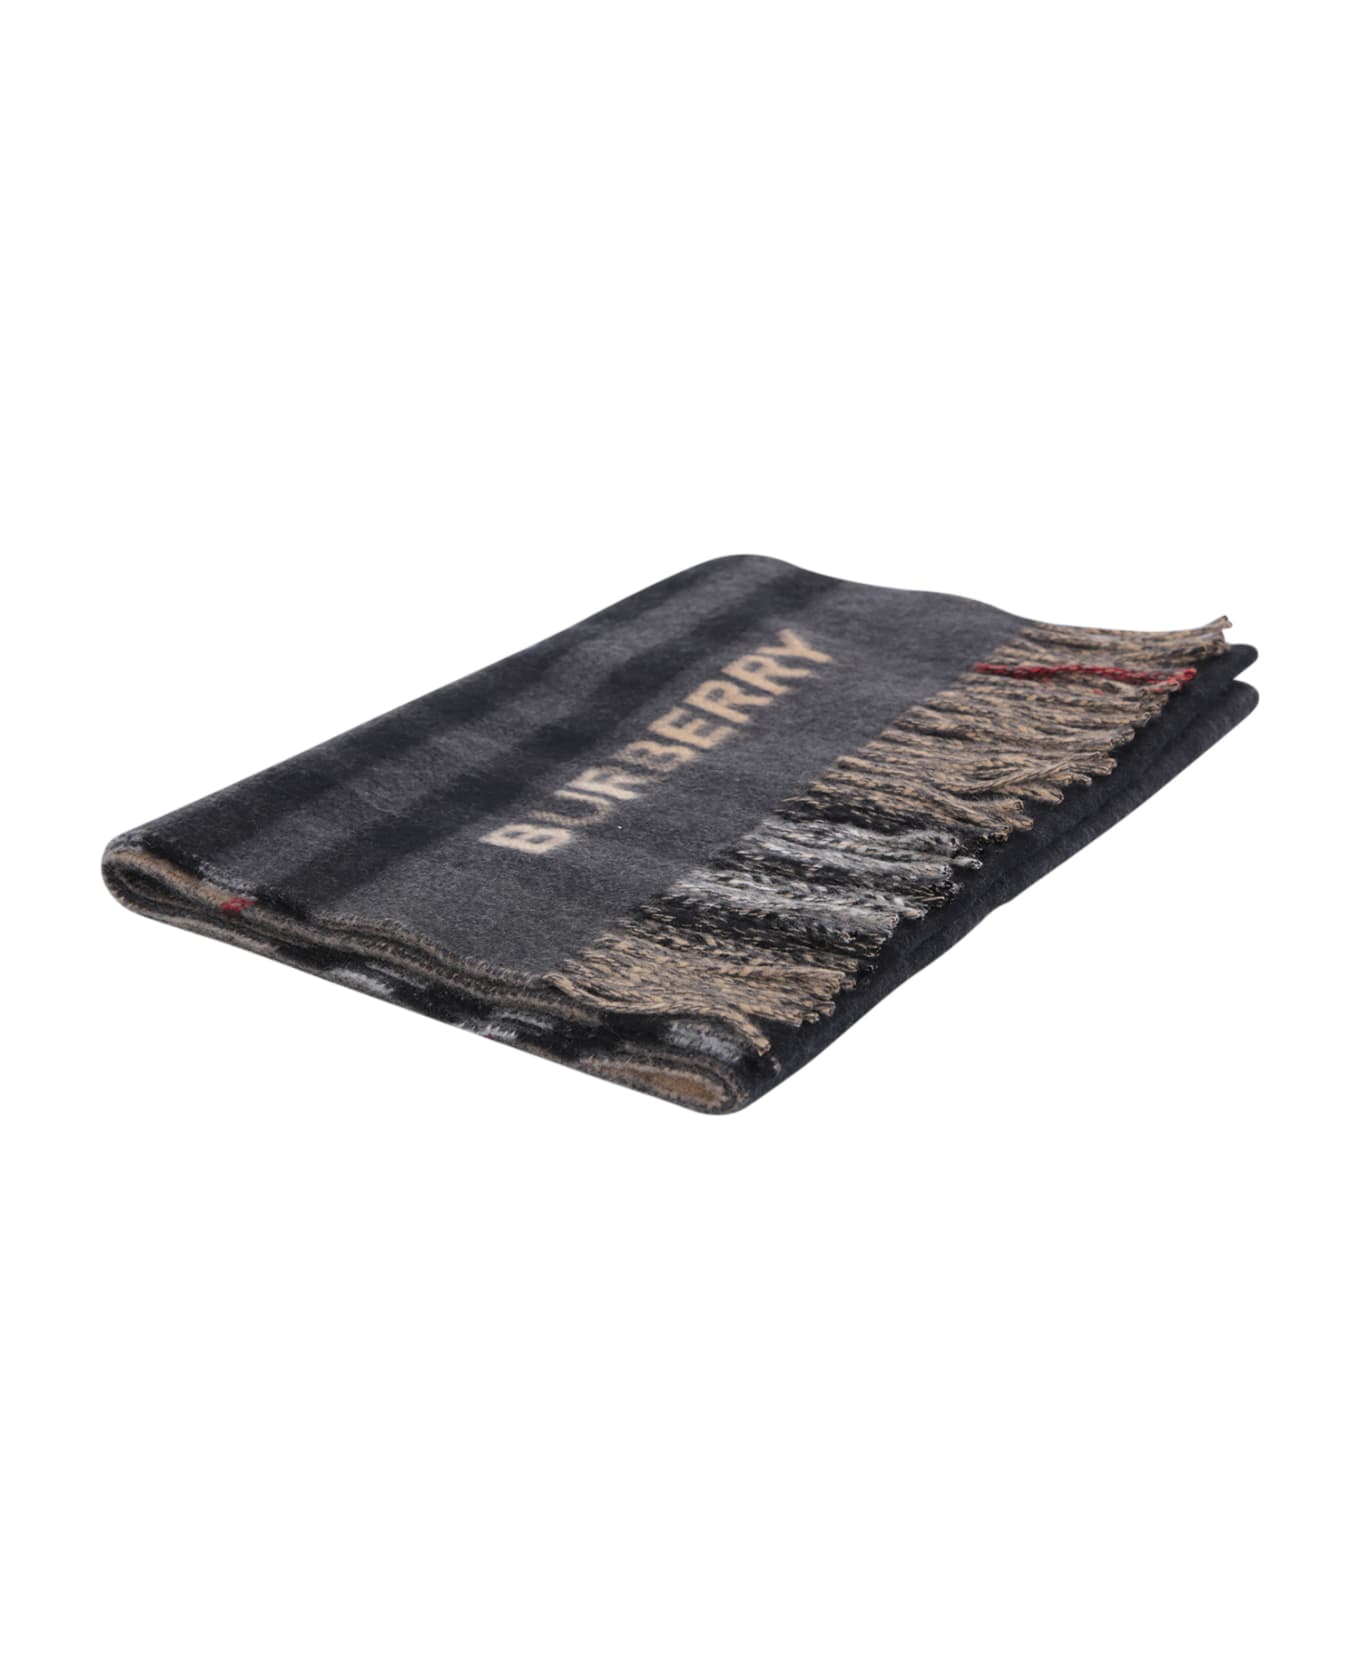 Burberry Embroidered Cashmere Scarf - Beige, black スカーフ